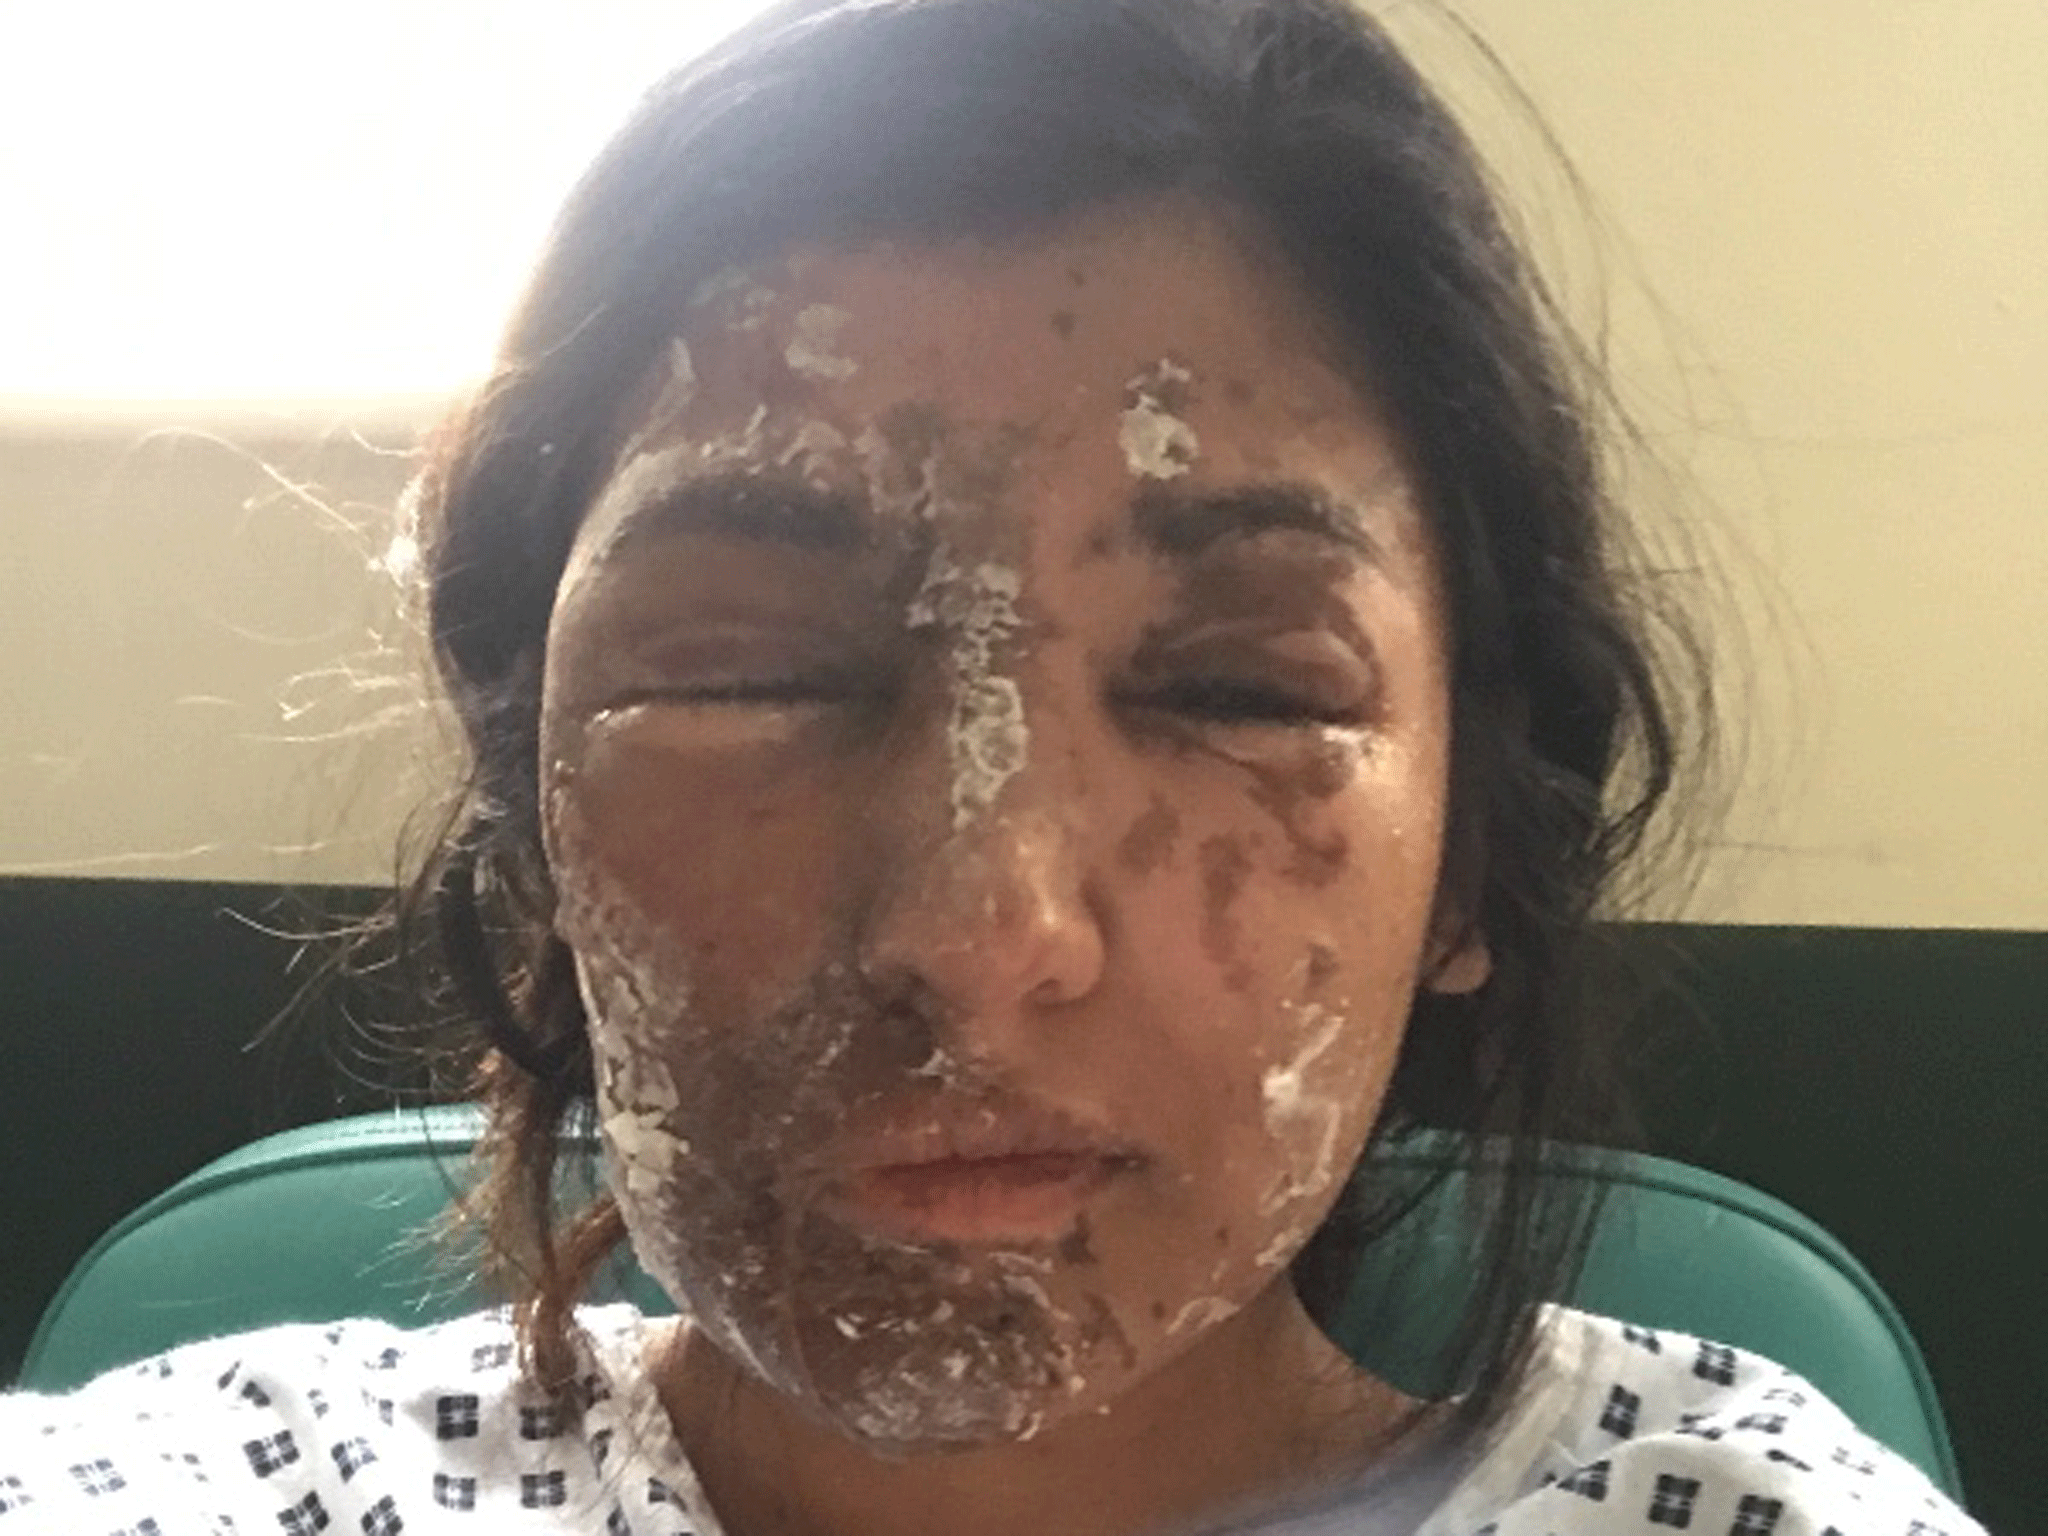 Resham Khan suffered burns to her face and body